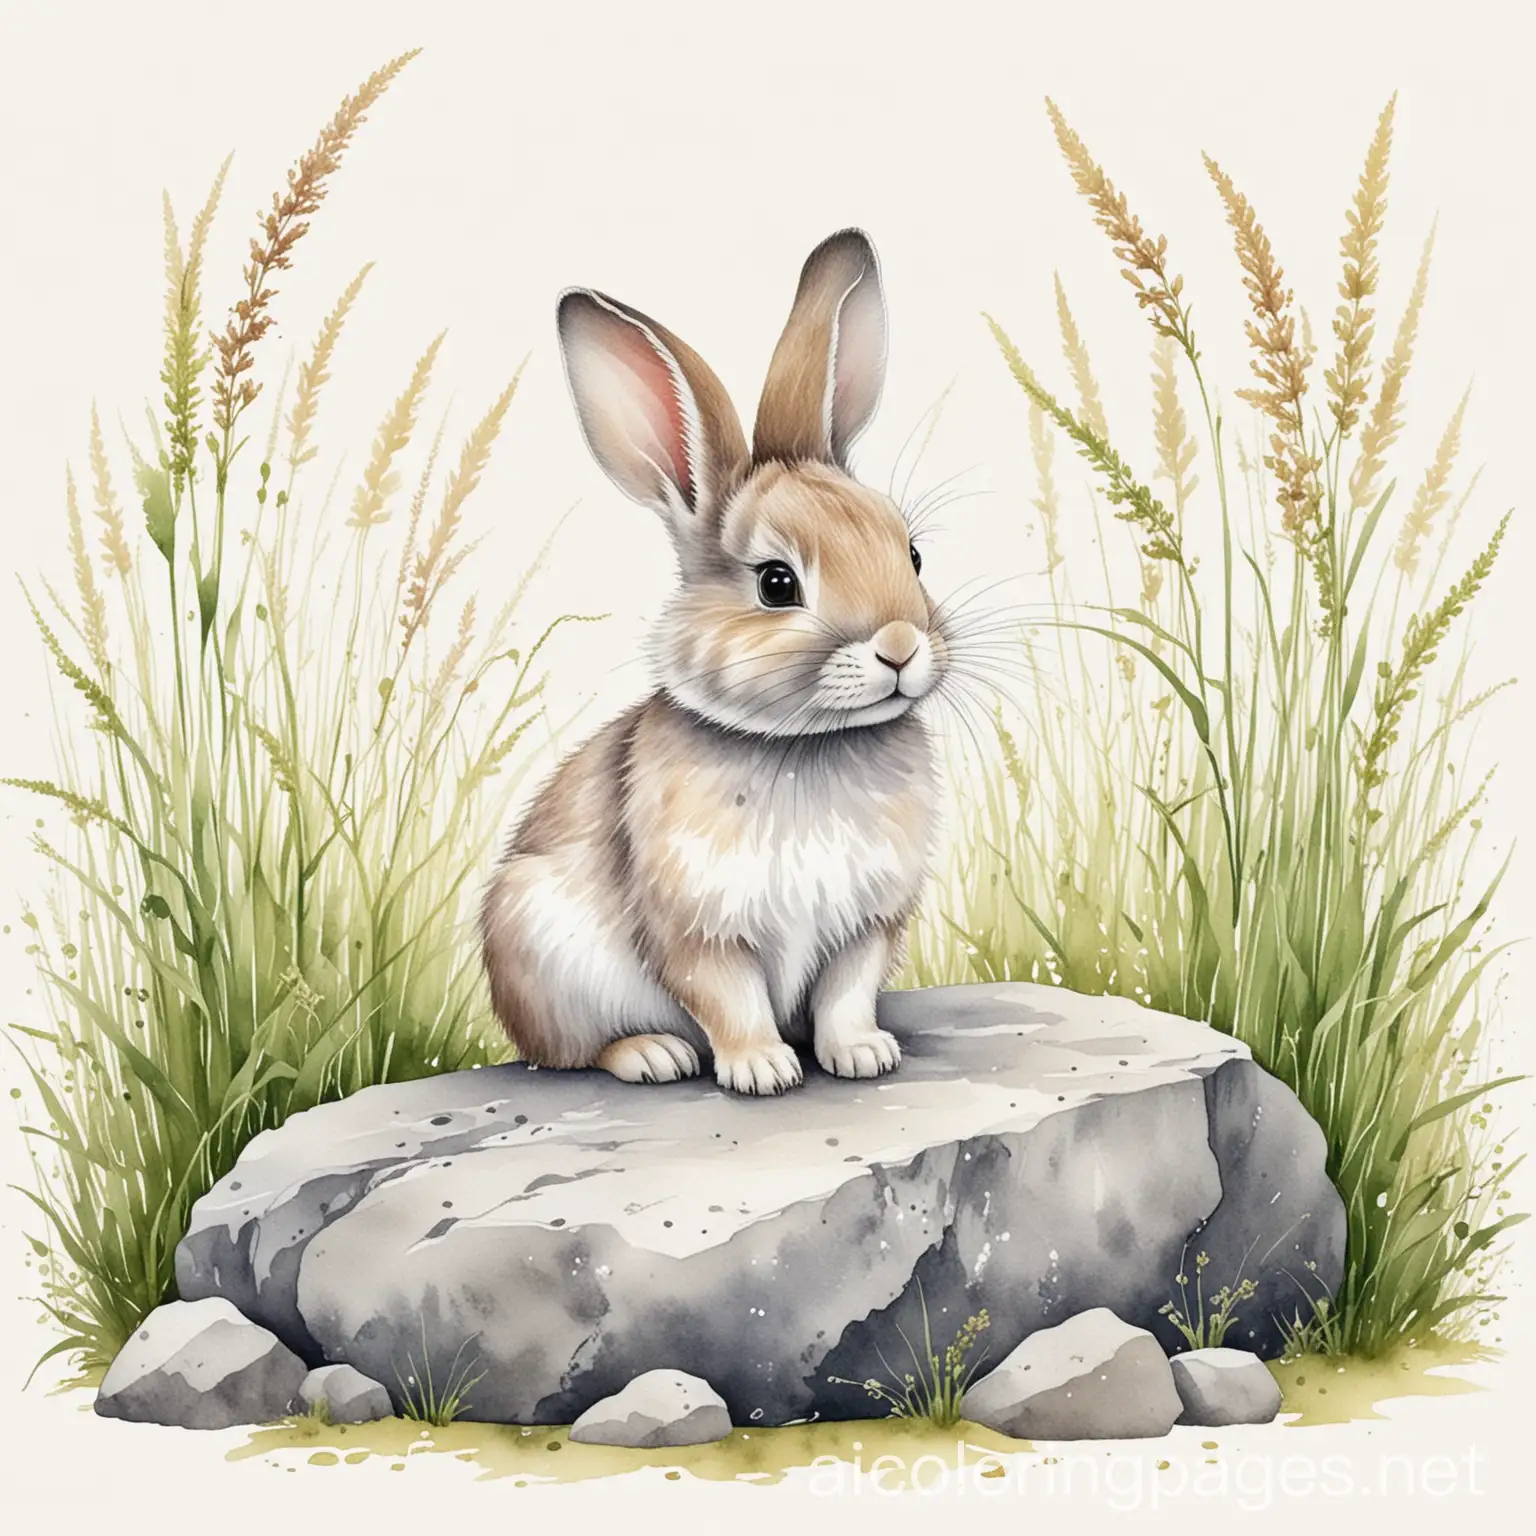 Cute-Rabbit-Sitting-on-Rock-Surrounded-by-Grass-Watercolor-Illustration